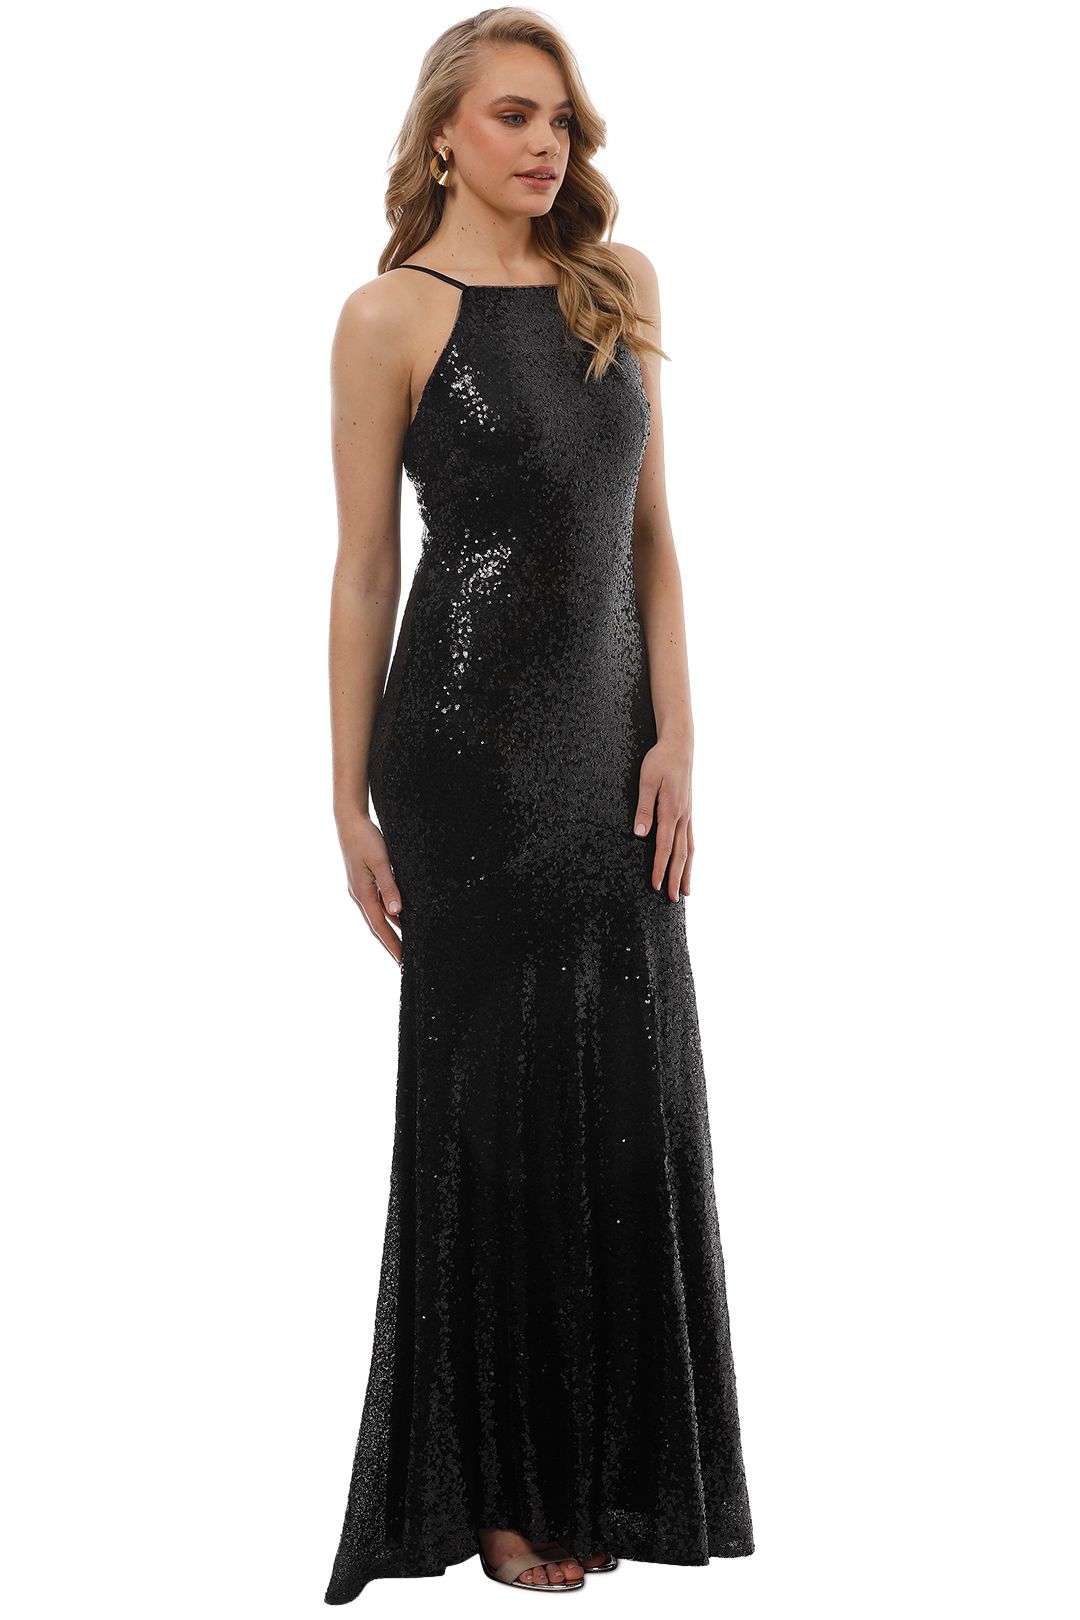 Theia - Jessica Gown - Black - Side